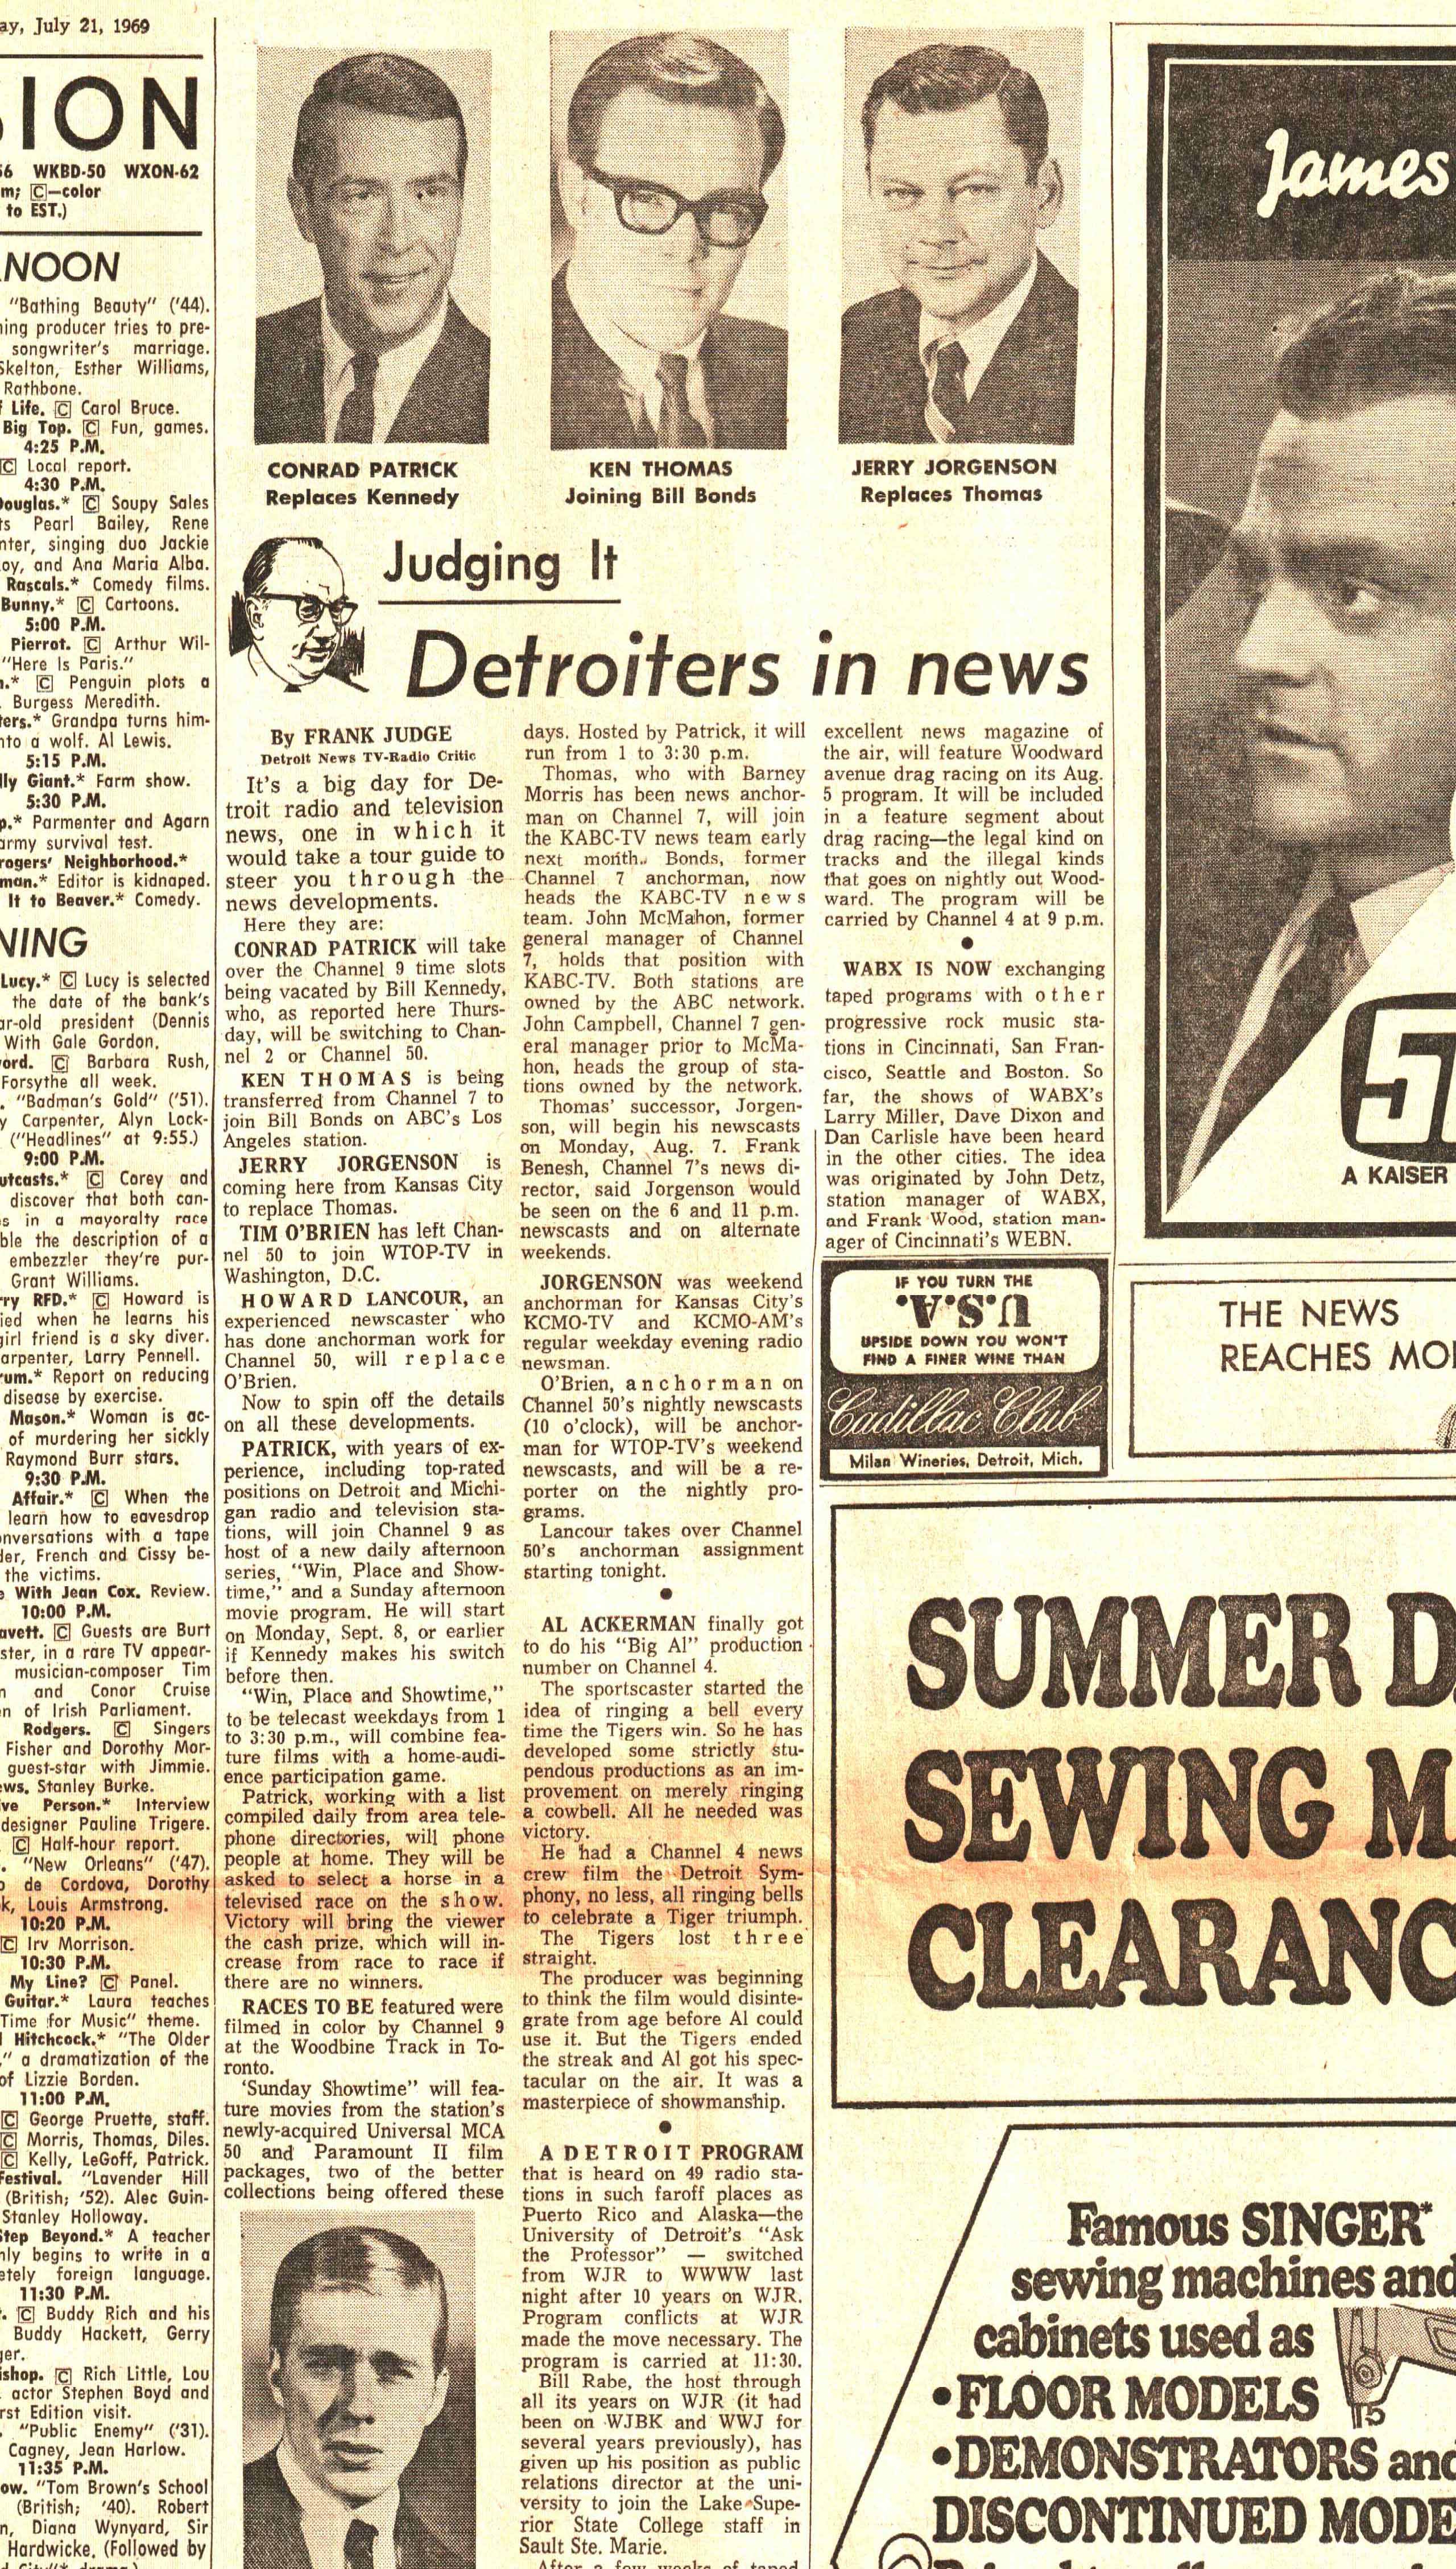 The Detroit News - July 21, 1969